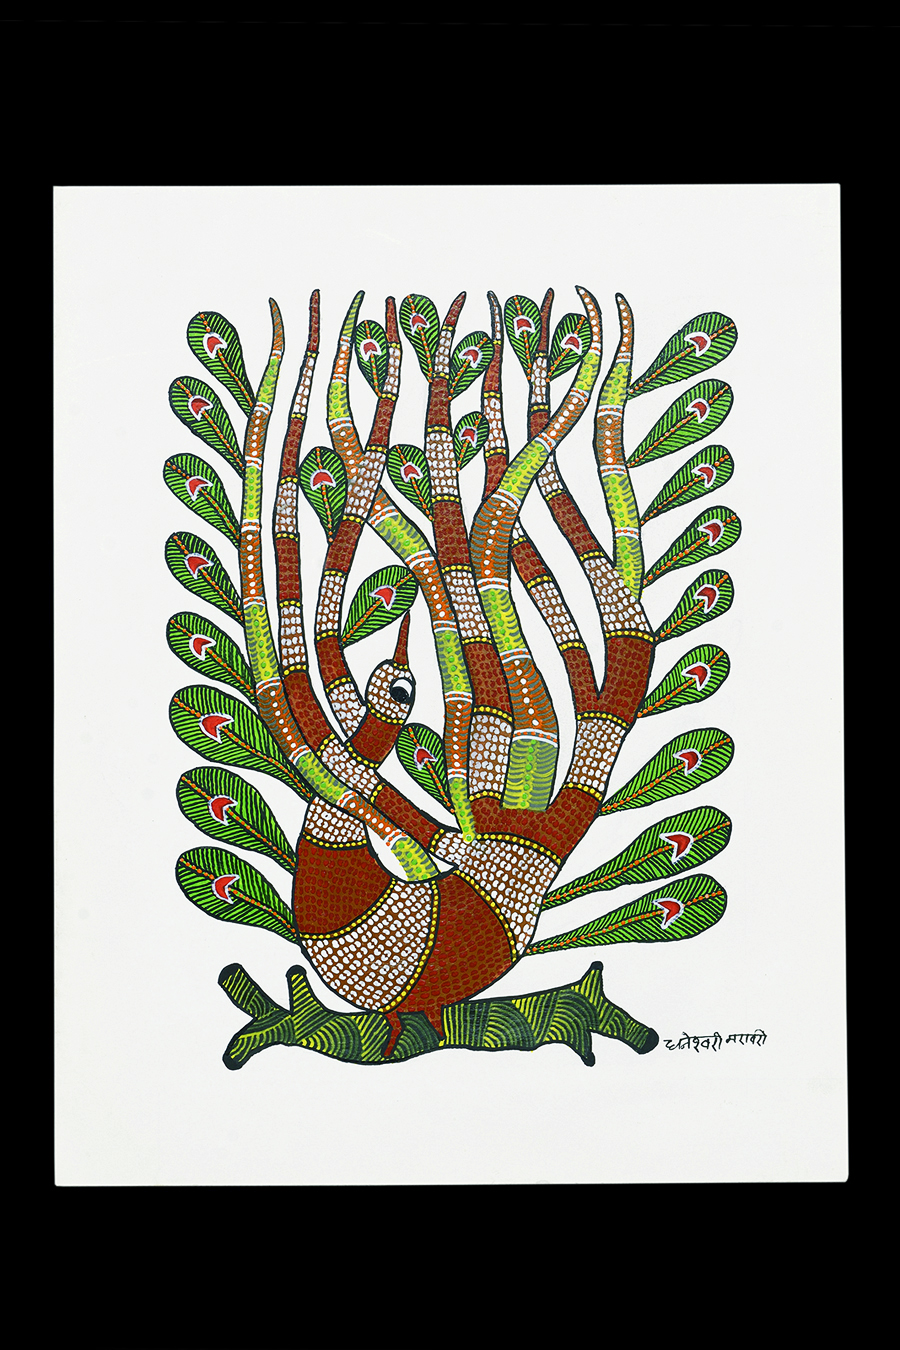 Dancing Peacock - Gond Painting